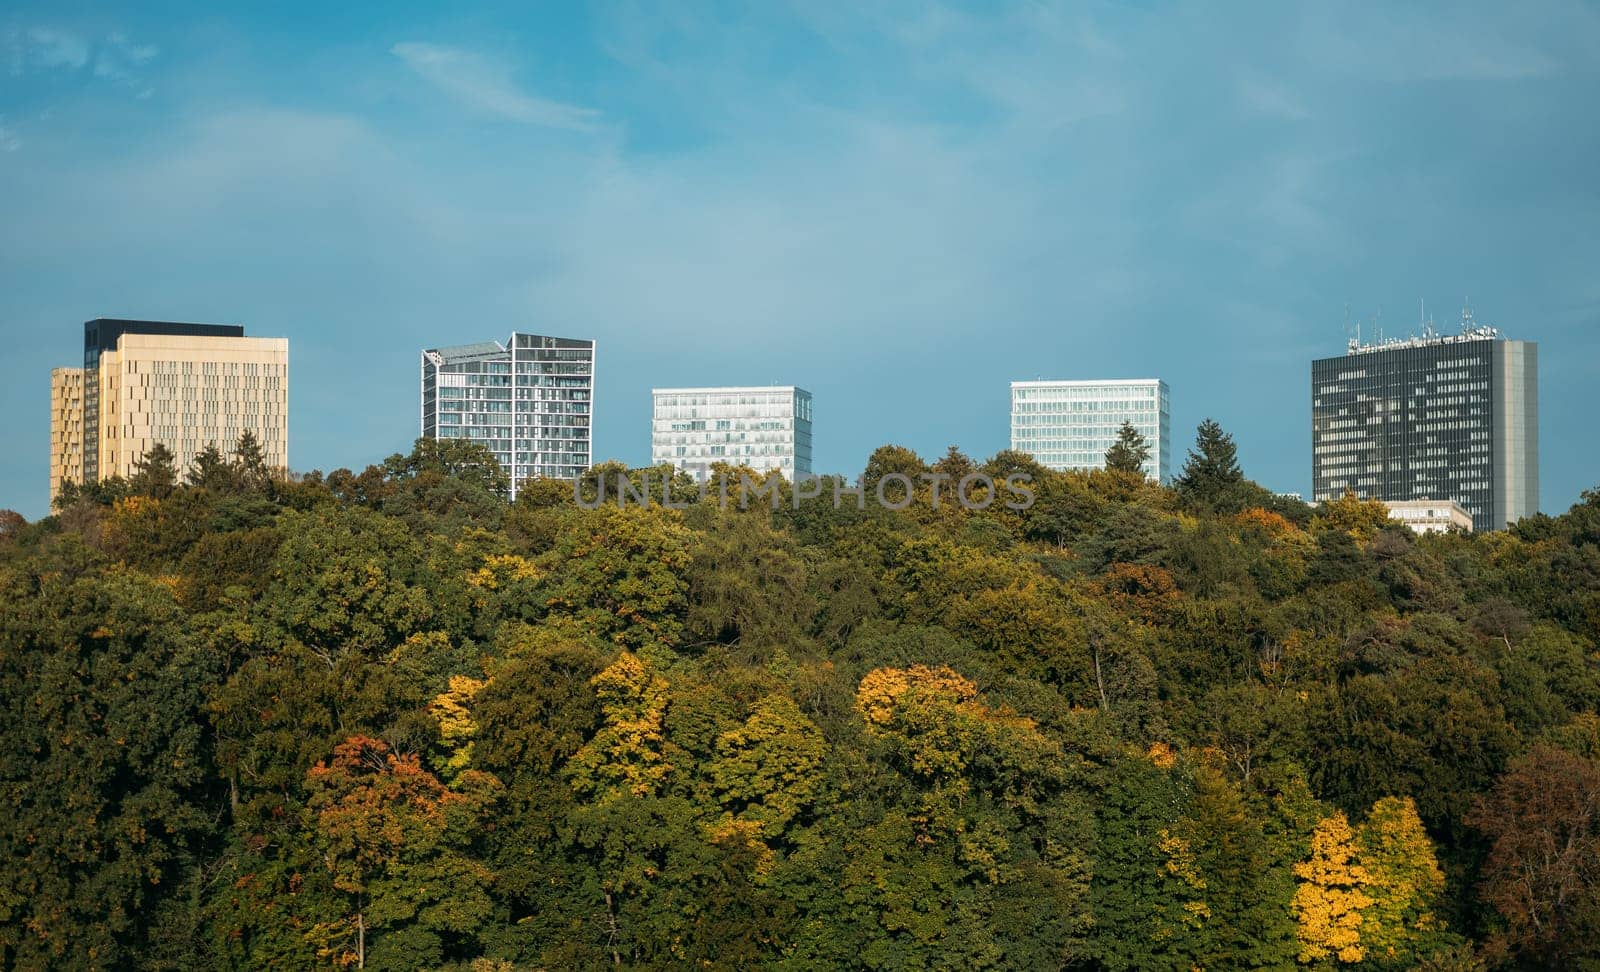 Modern high-rises buildings stick out of dense forest on hill slope in Luxemburg. View of modern city with different skyscrapers built on high ground